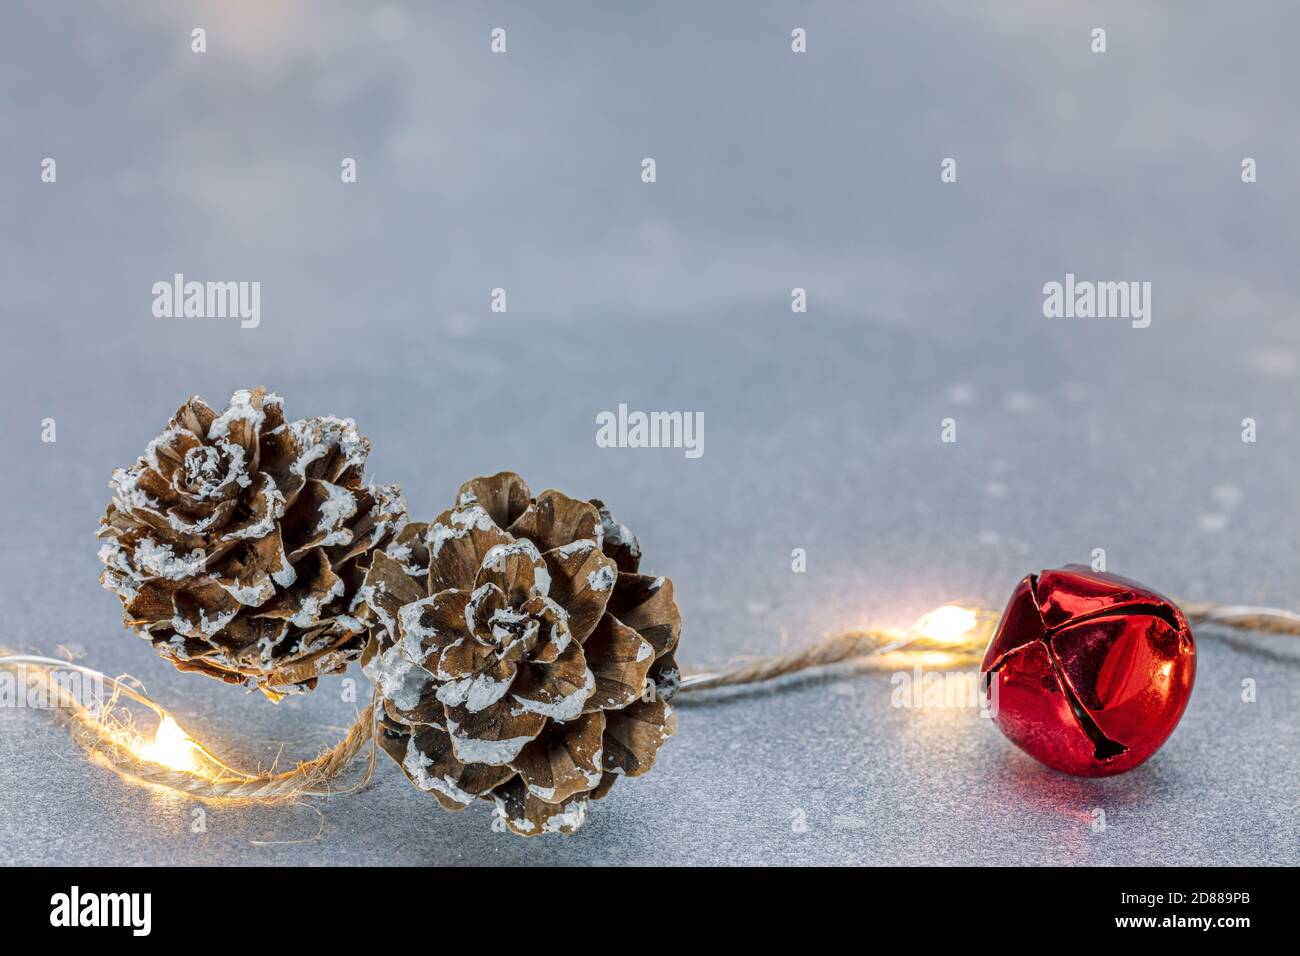 new year decorations. glowing holiday lights decorated with jingle bell and pine cones on silver background Stock Photo